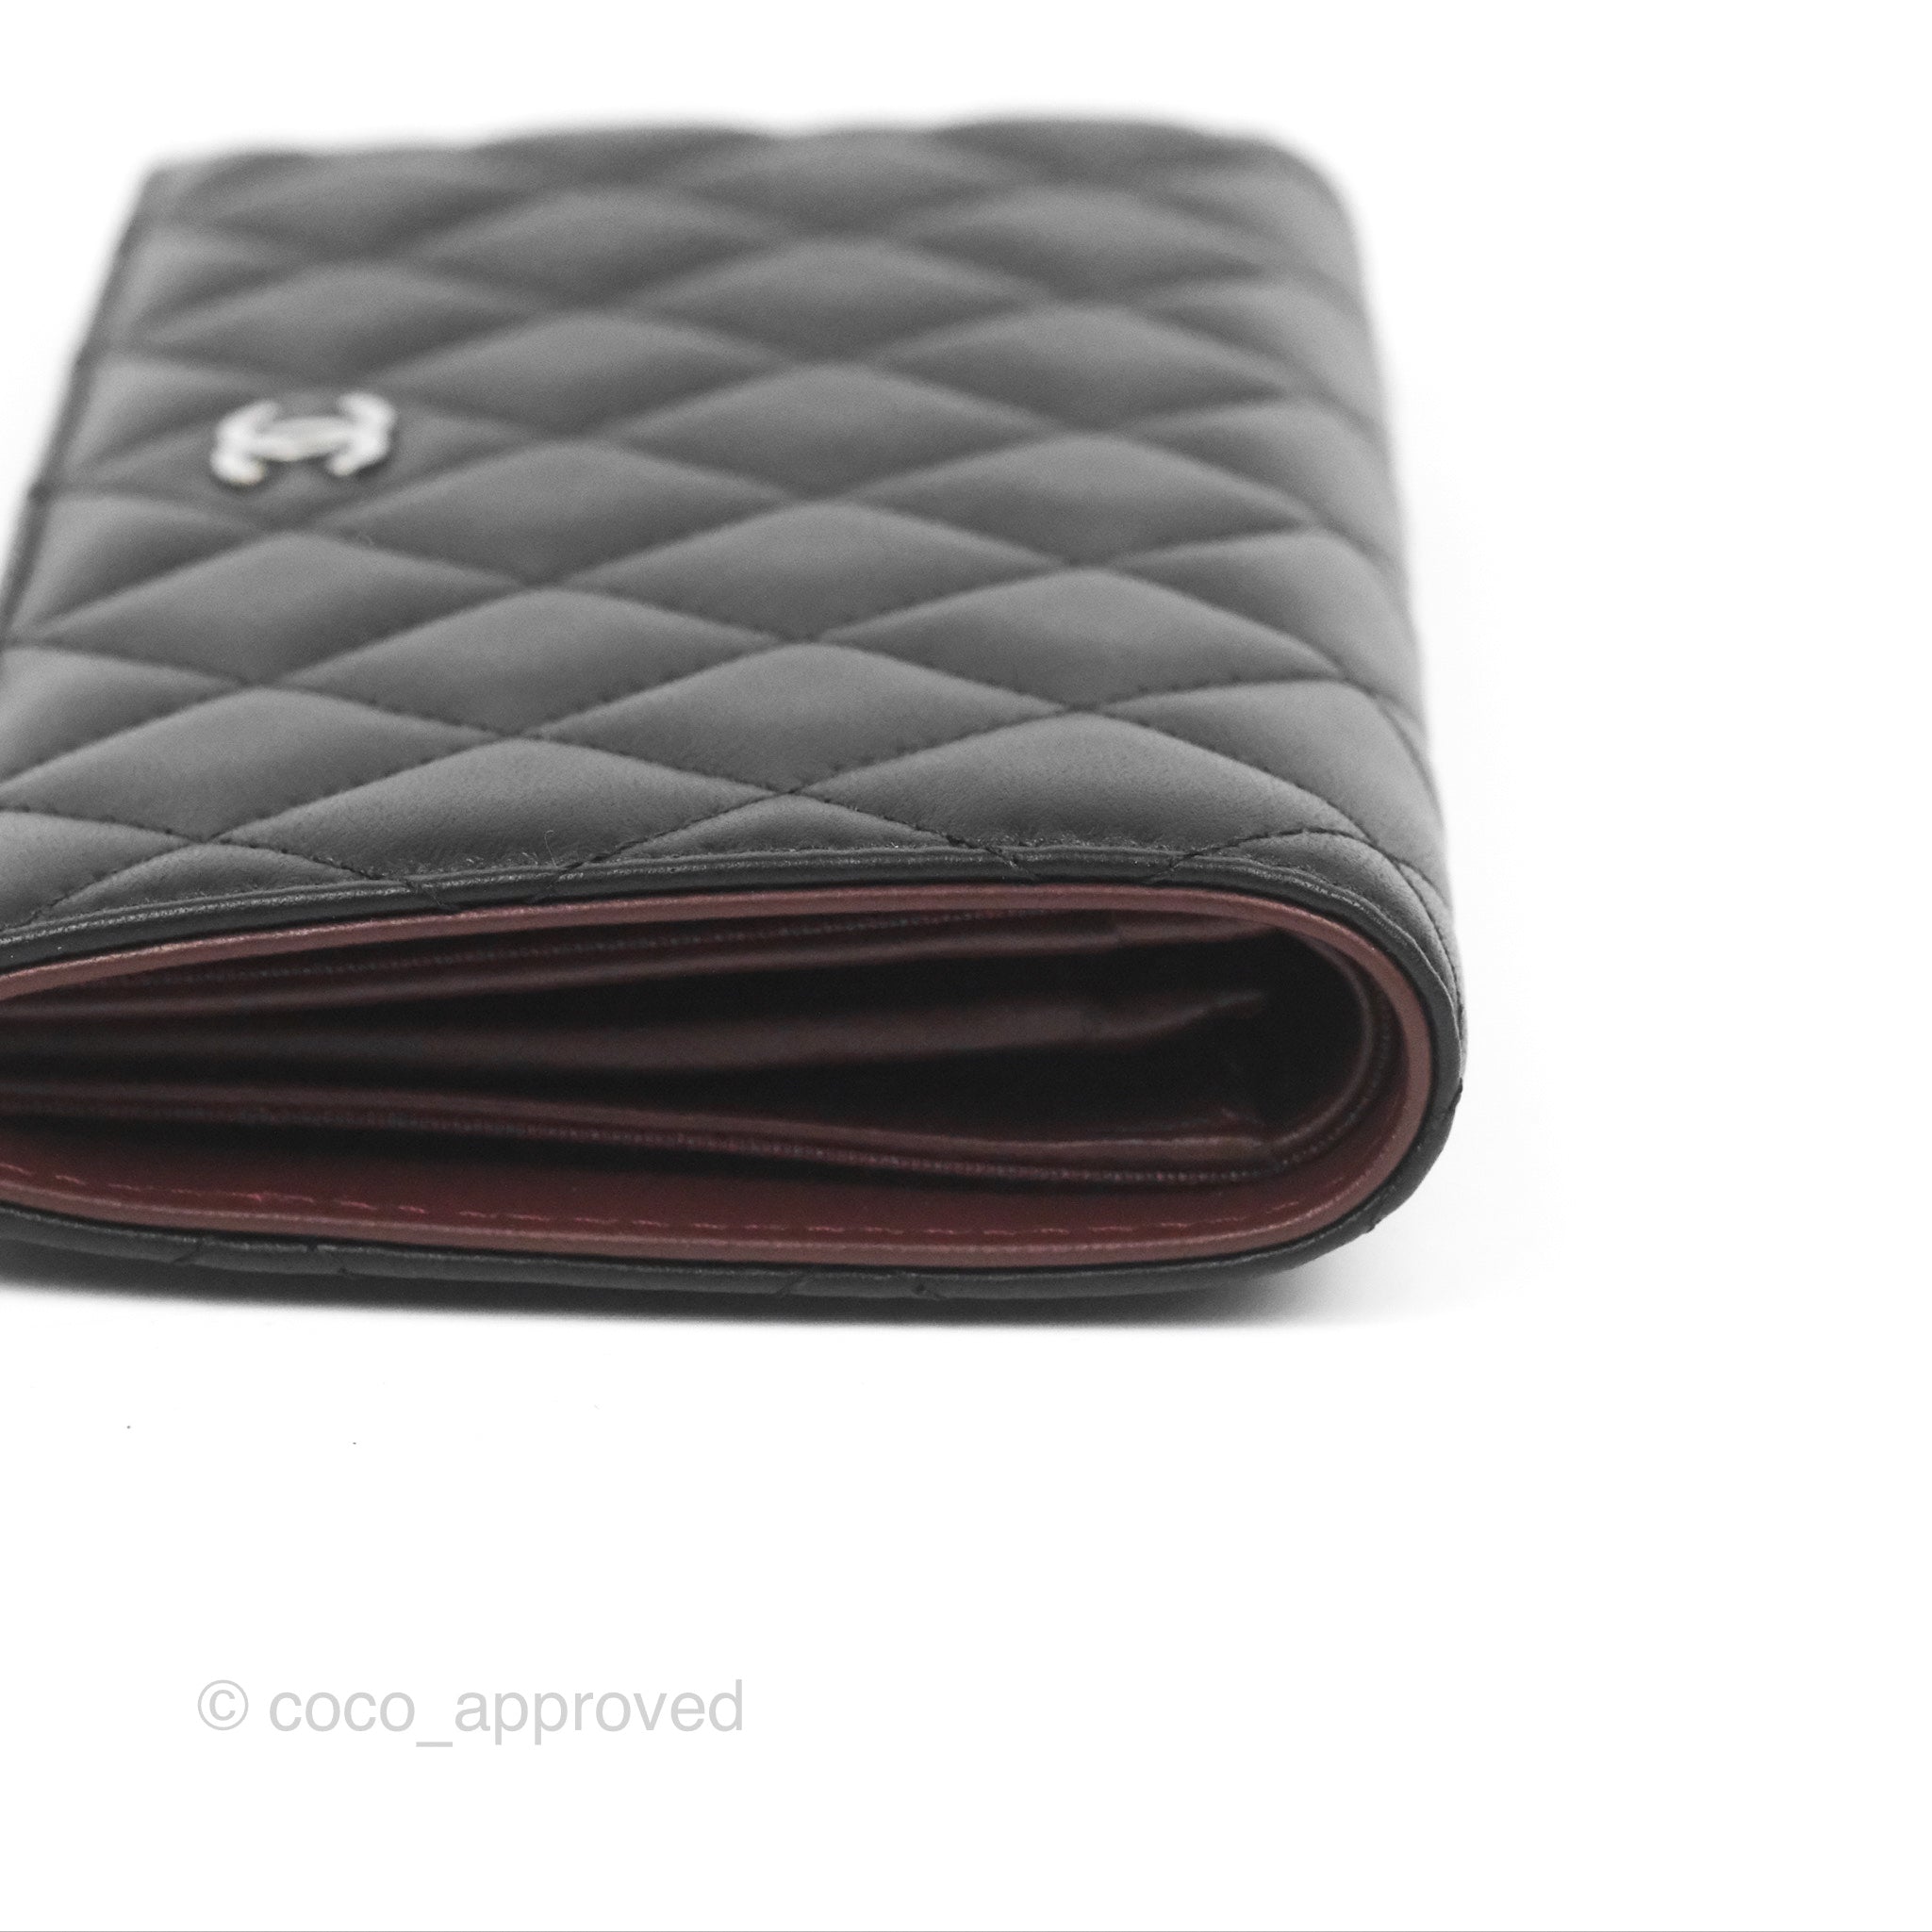 Sold at Auction: CHANEL BIFOLD WALLET FRONT LOGO